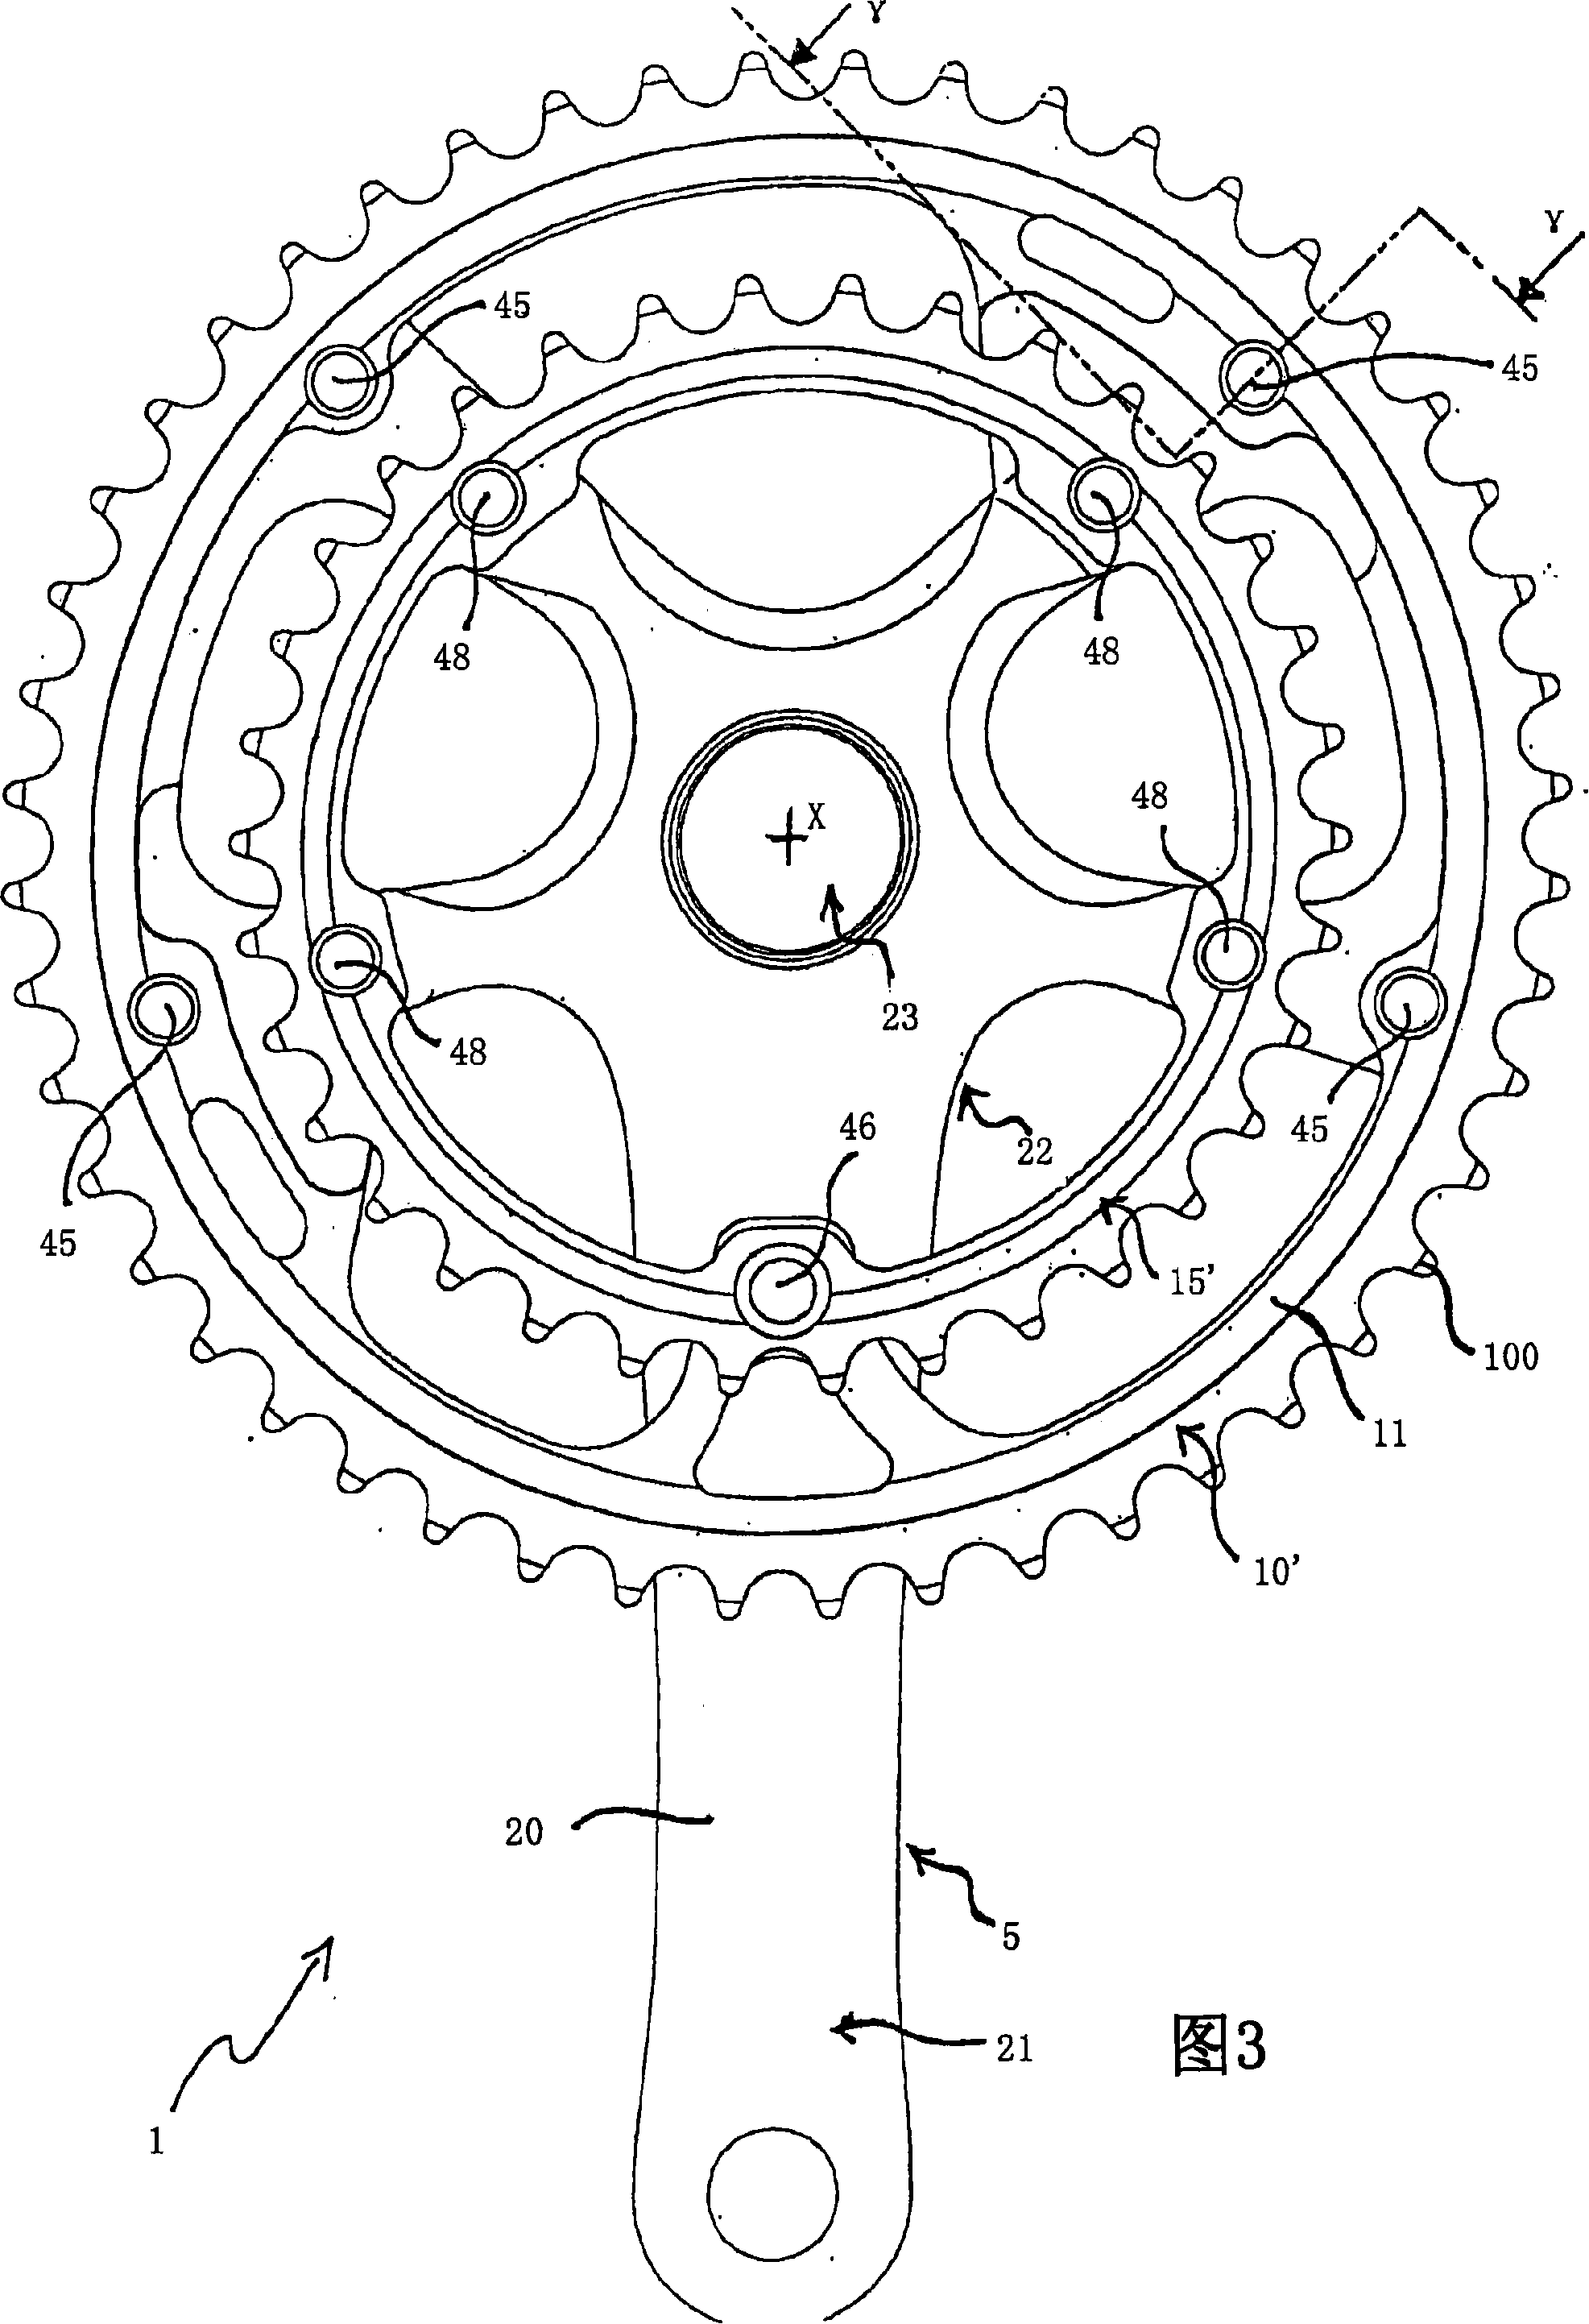 Right crank arm assembly for a bicycle and crank arm and front sprocket thereof